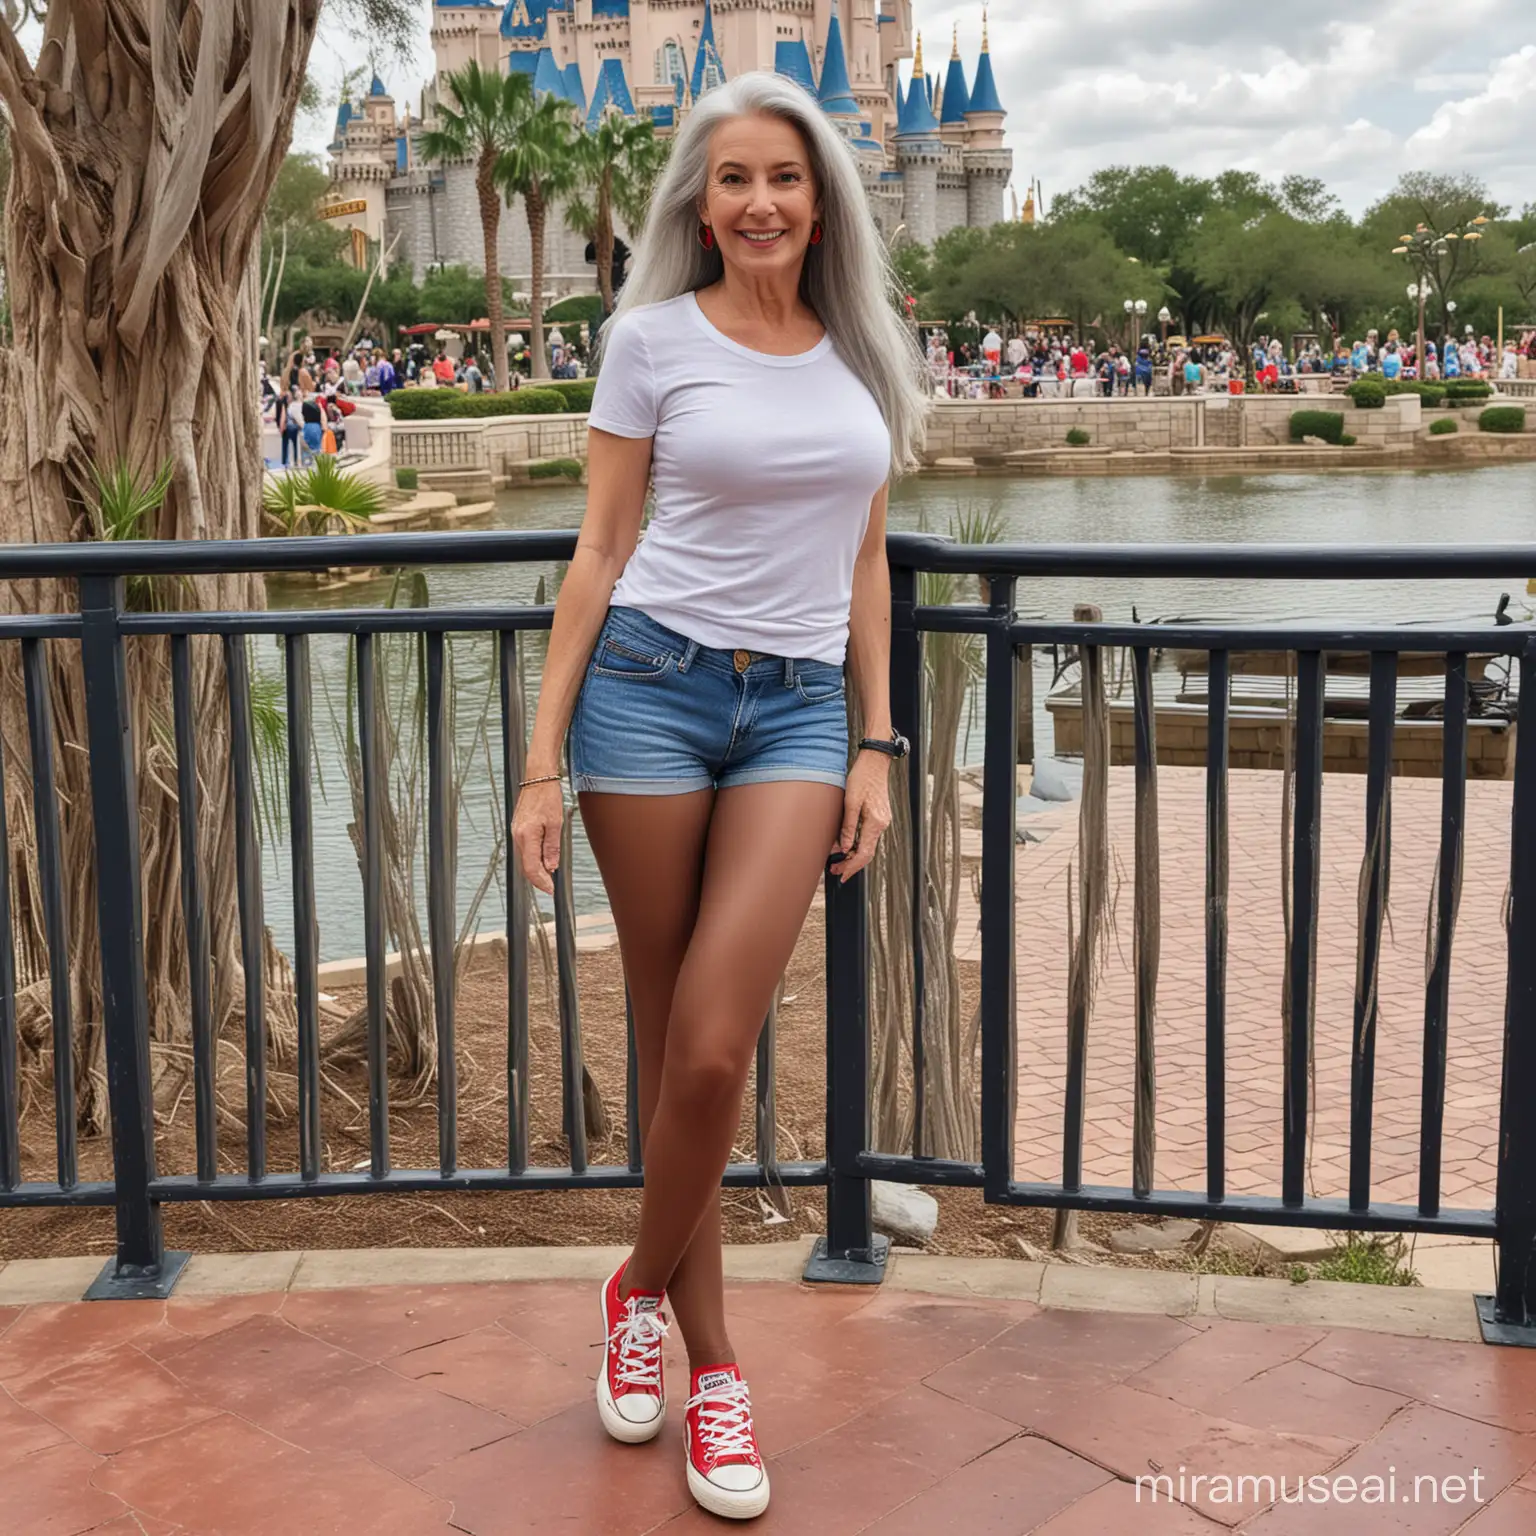 mature woman with long silver hair, shiny brown pantyhose, jean shorts, red converse sneakers, at disney world